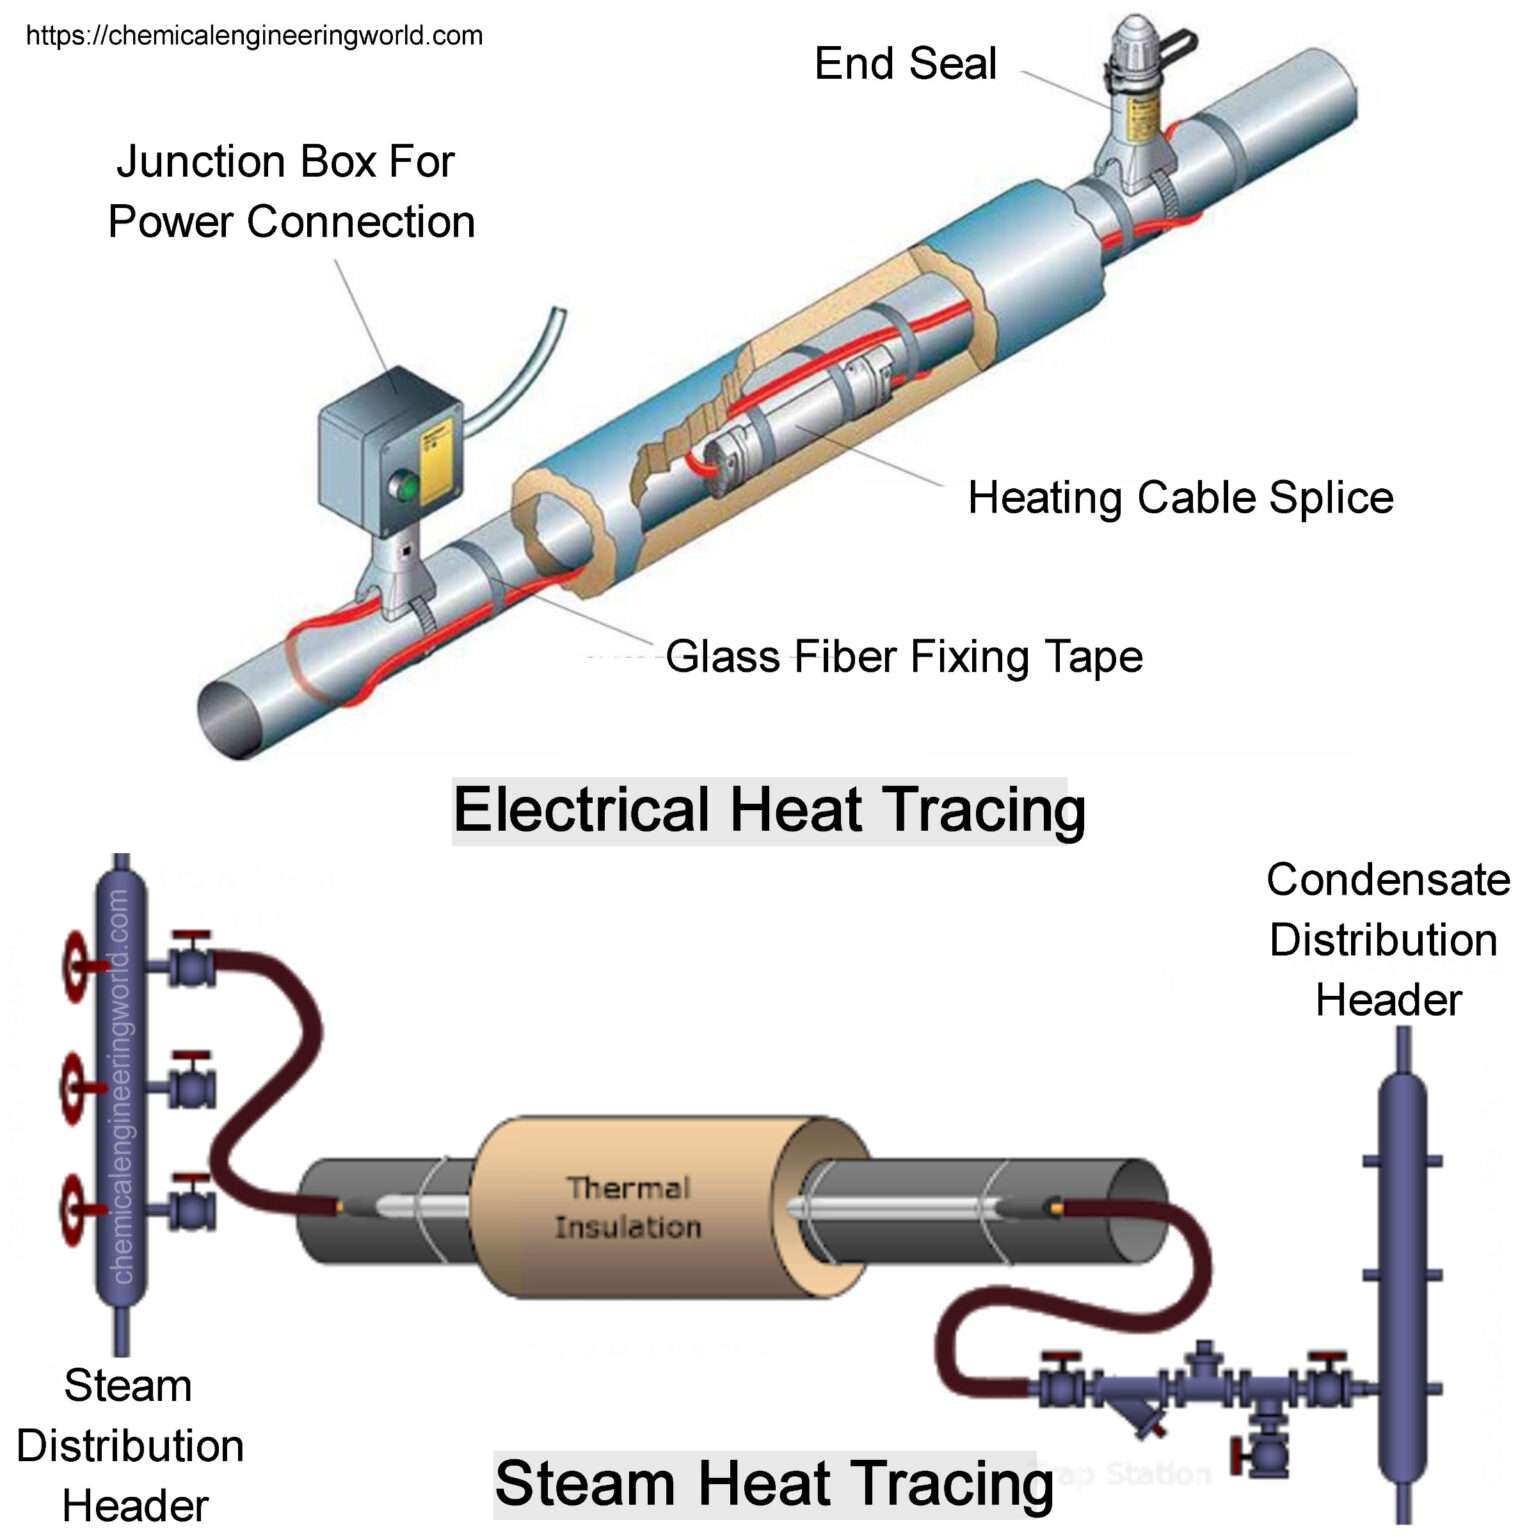 heat-tracing-on-pipeline-chemical-engineering-world